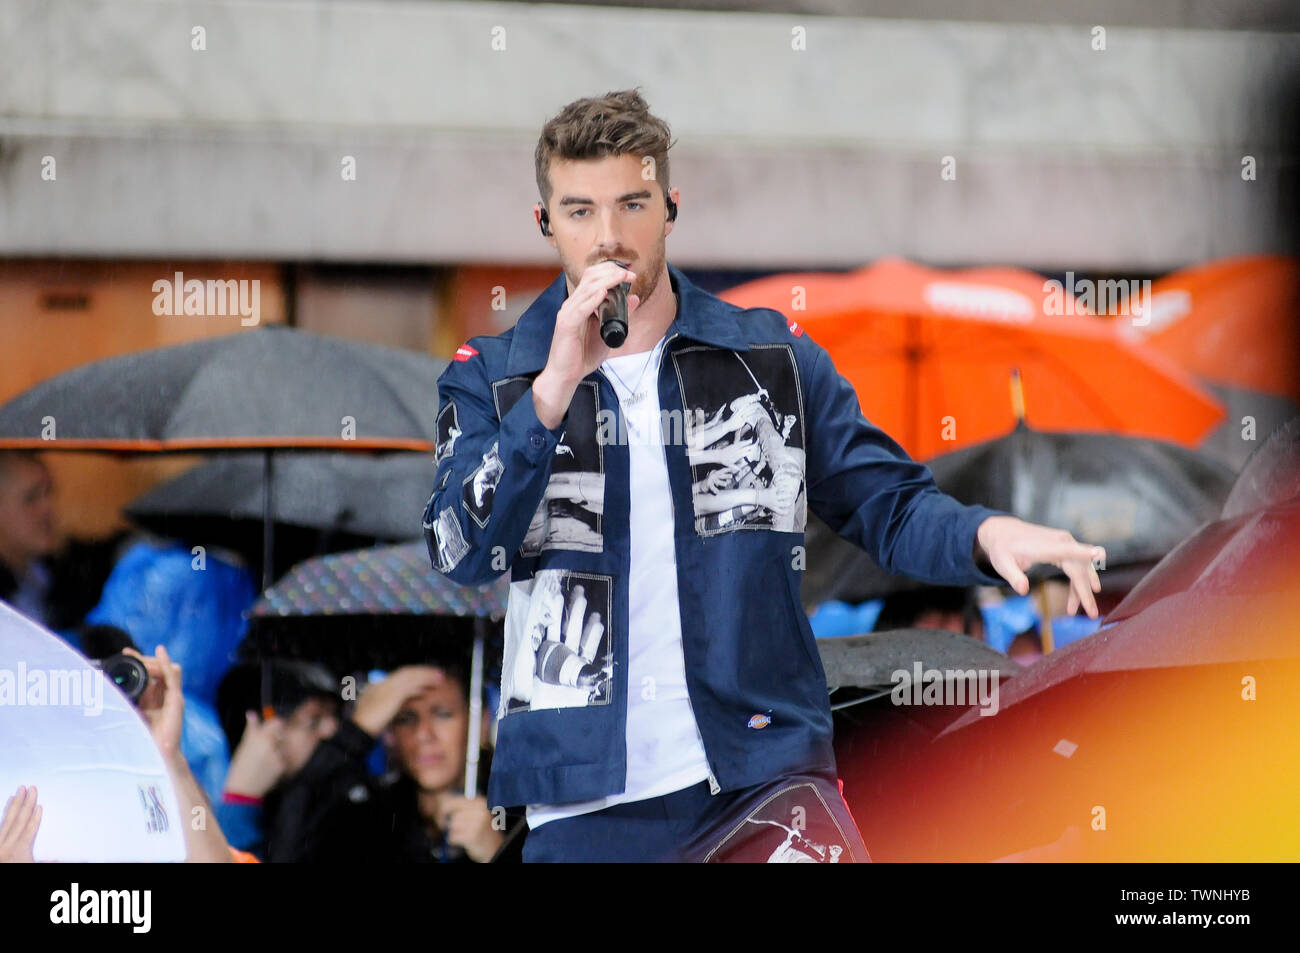 New York City, United States. 21st June, 2019. Andrew Taggart performs during the Chainsmokers performance of NBC's Today Show Citi Concert Series with Bebe Rexha, Bulow and Ty Dolla $ign as special guests in New York City. Credit: SOPA Images Limited/Alamy Live News Stock Photo